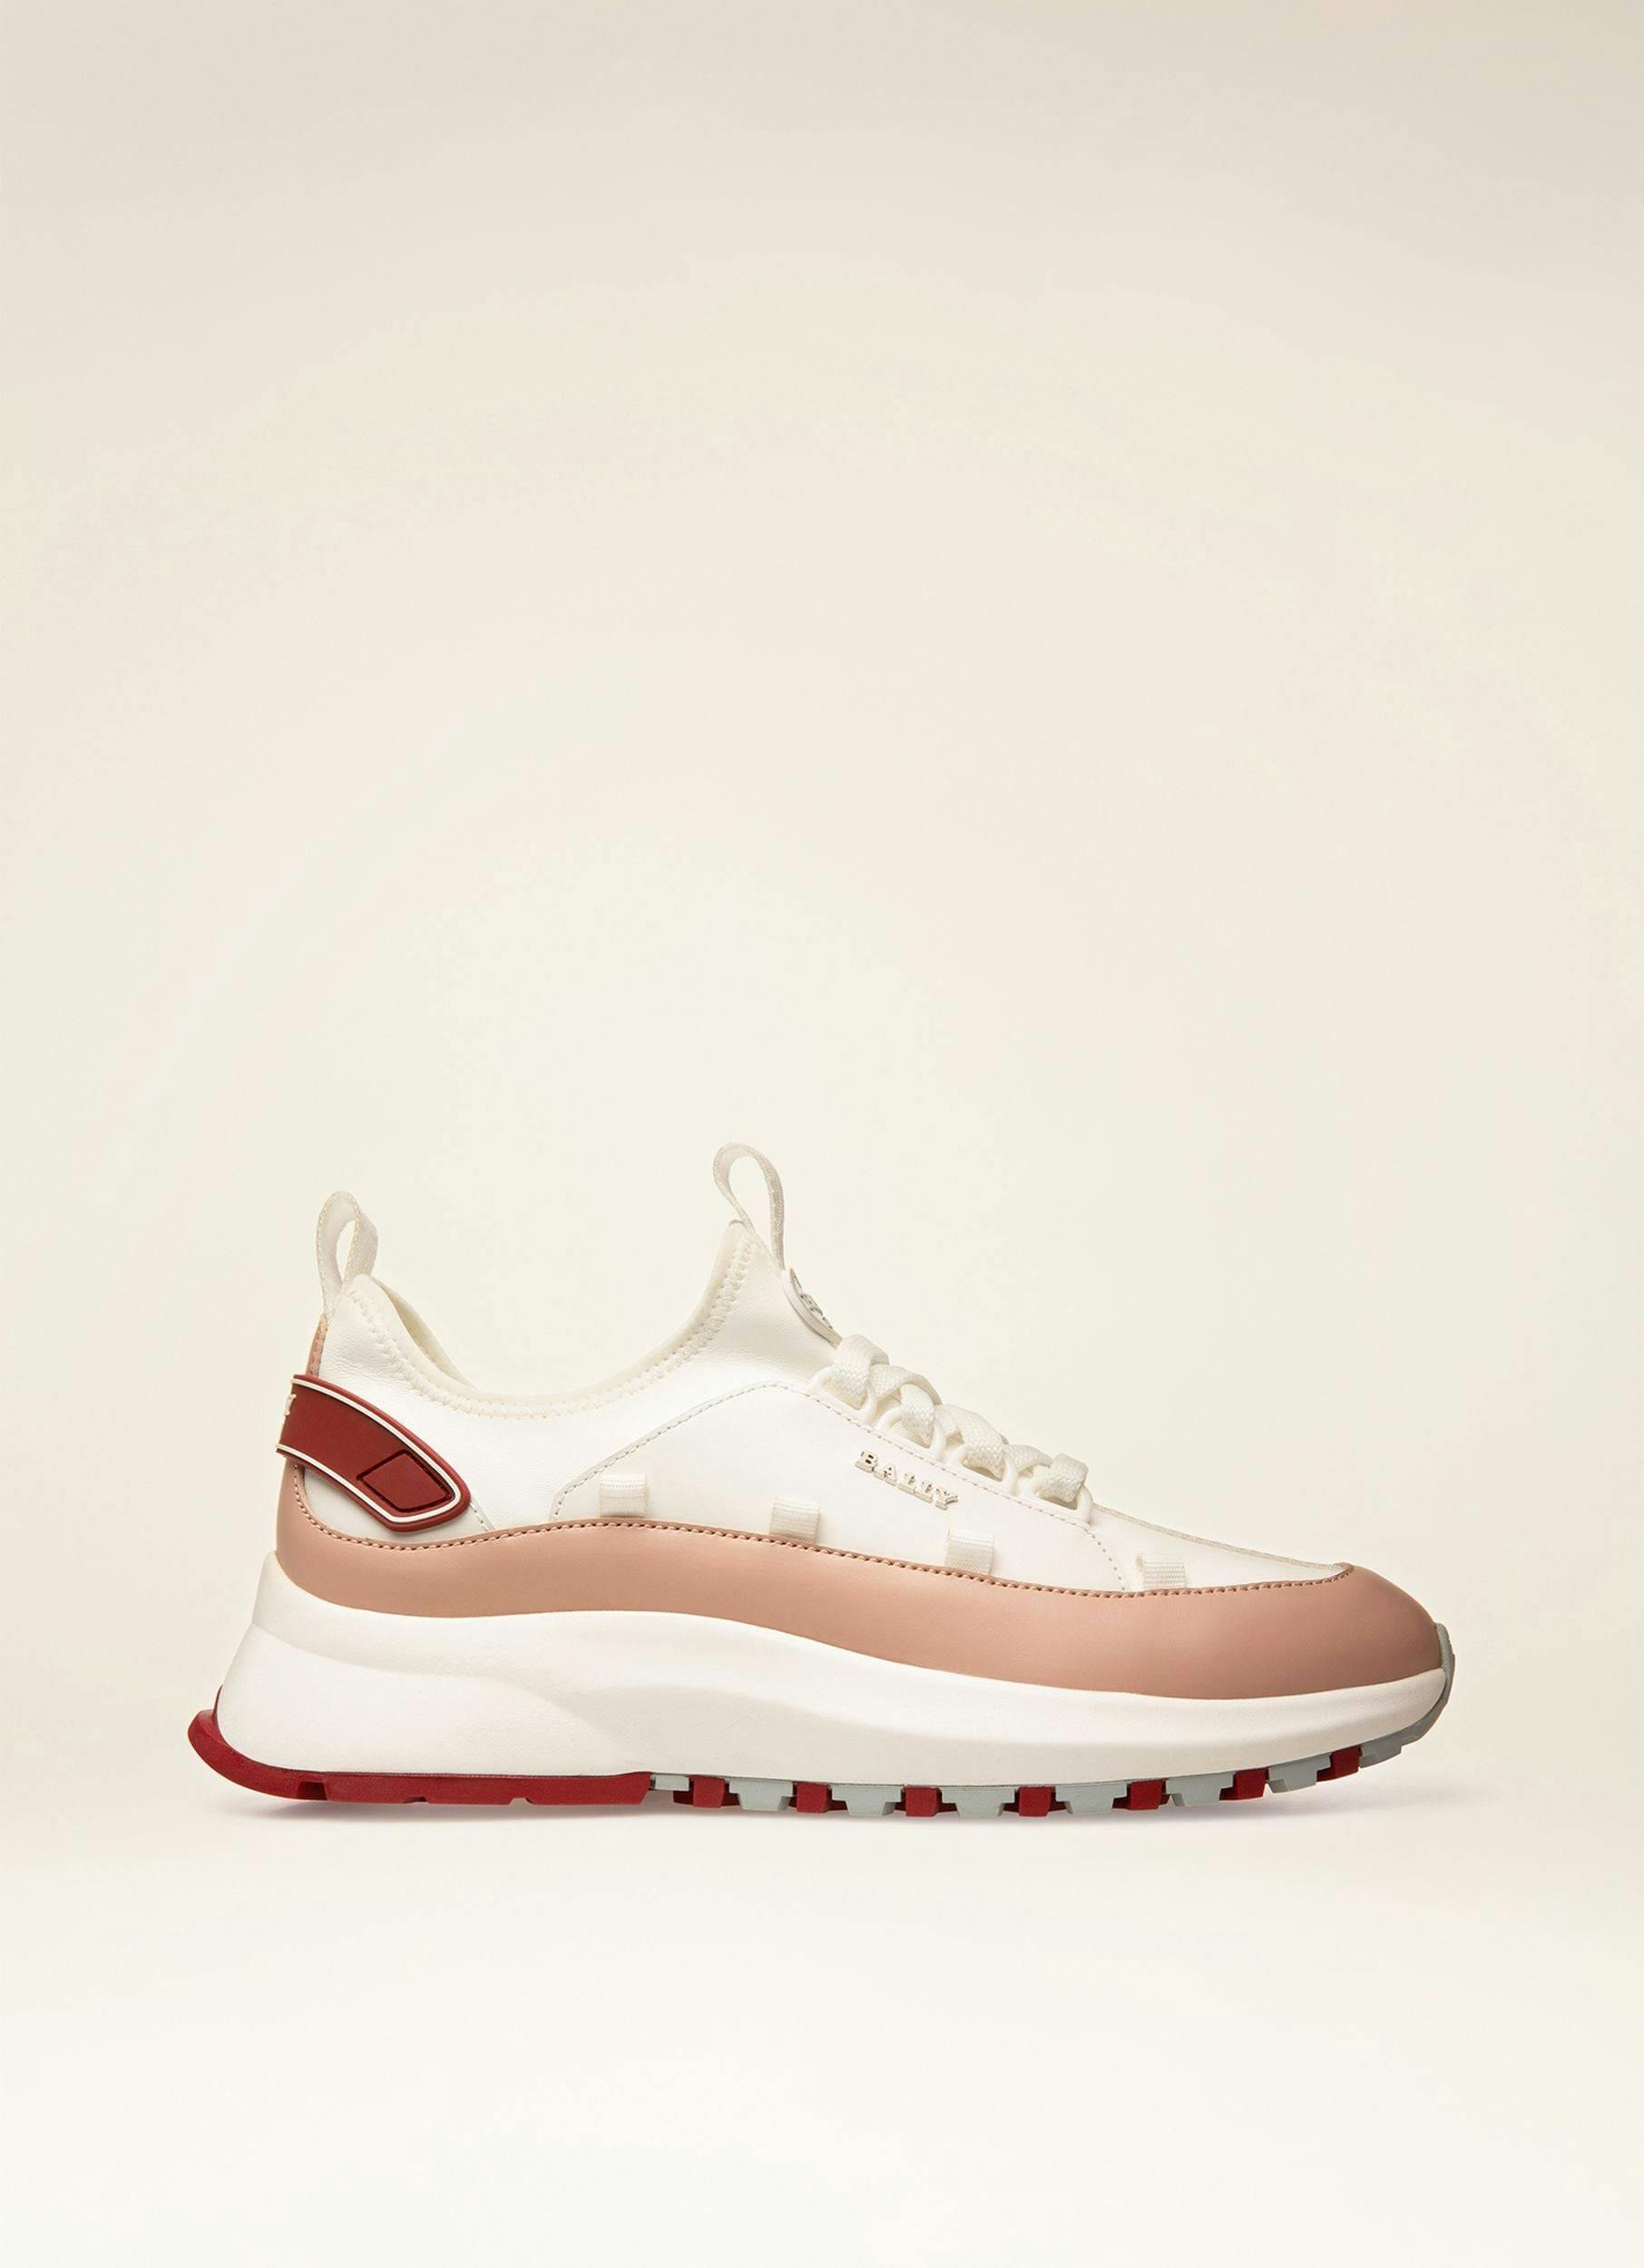 OUTLINE Leather Sneakers In White & Pink - Women's - Bally - 08